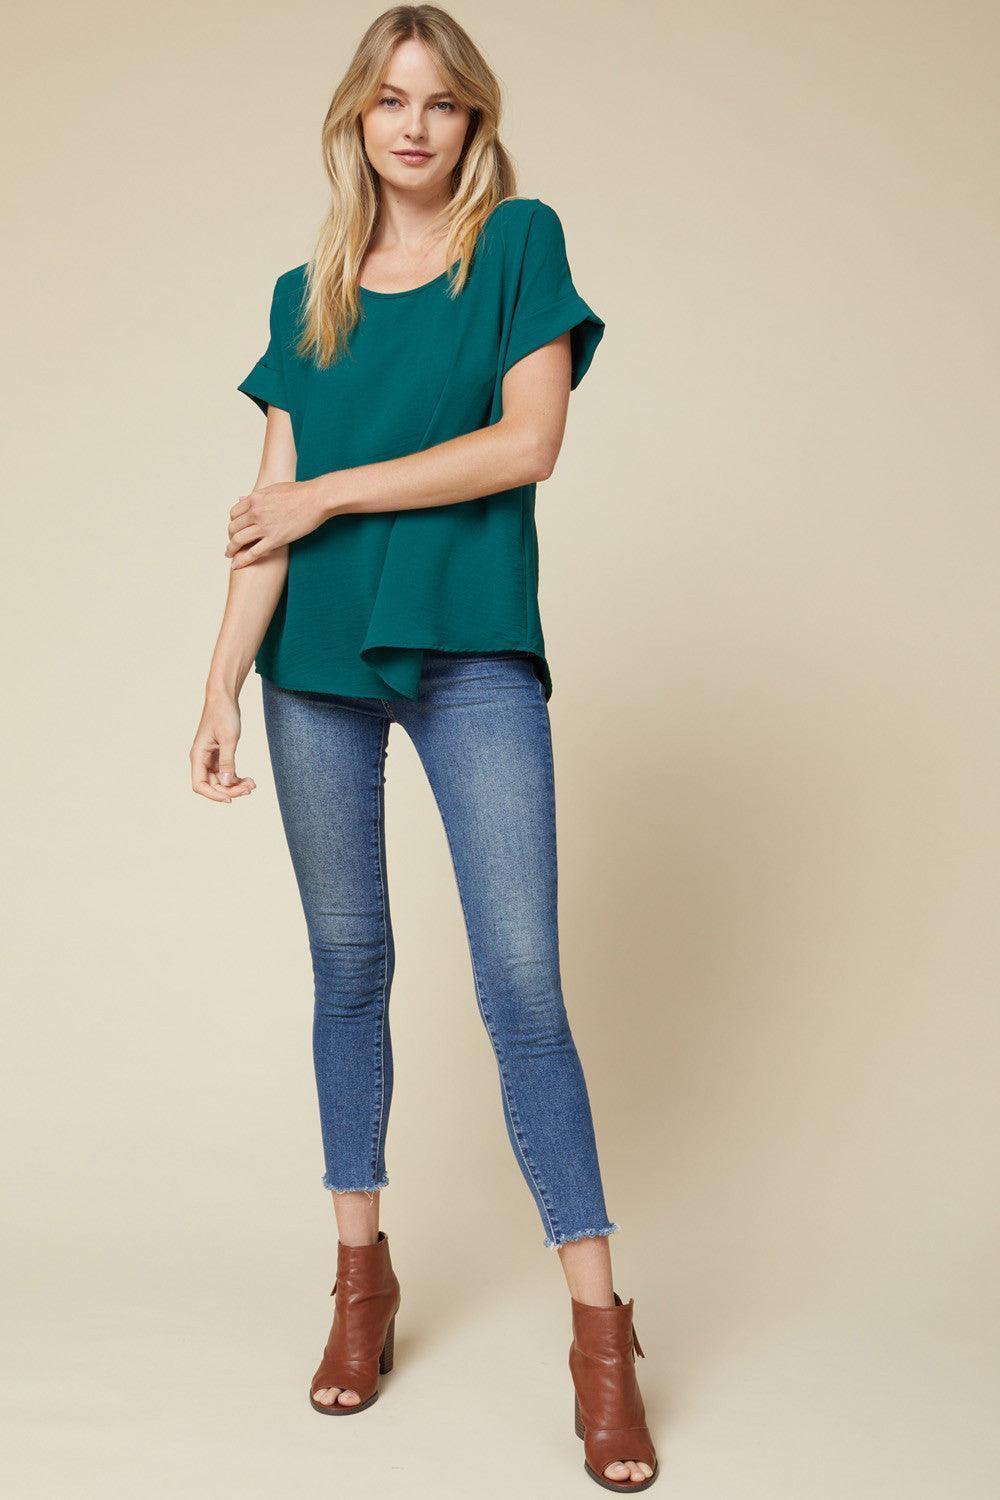 Classic Cuff Sleeved Top - Très Chic